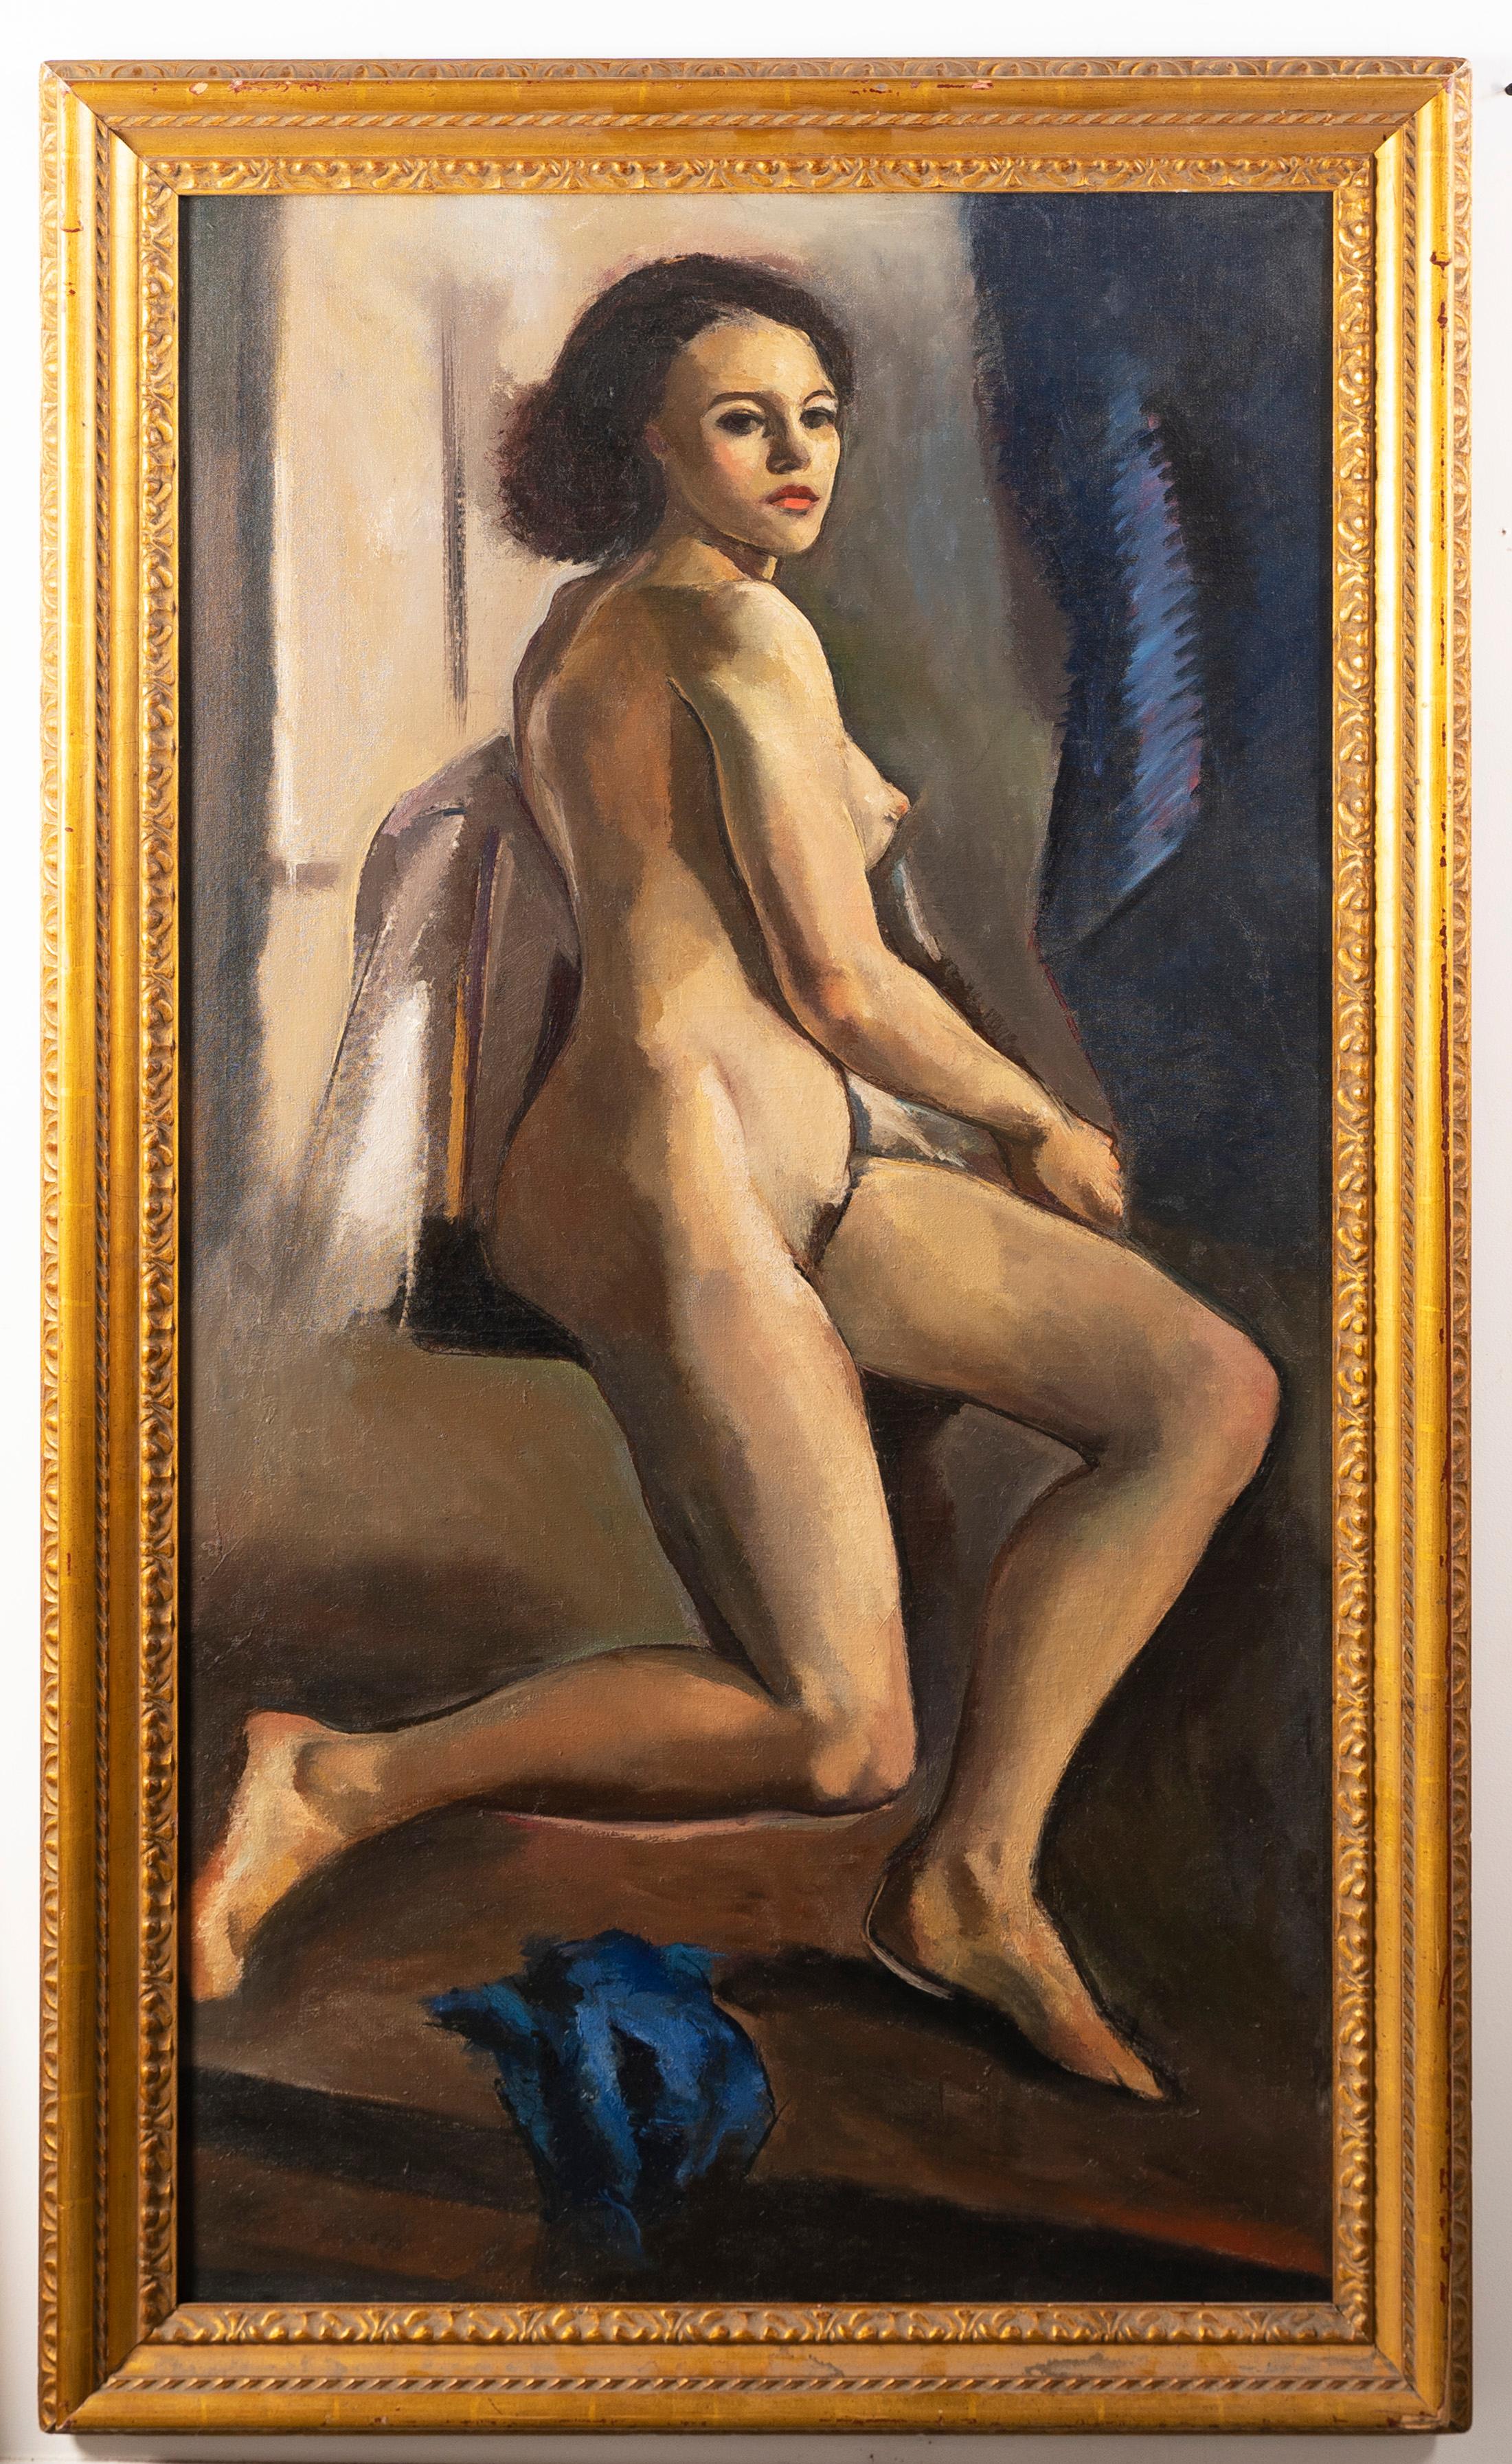 Antique American Life Size Huge WPA Nude Woman Artist Studio Portrait Painting  - Brown Nude Painting by Unknown